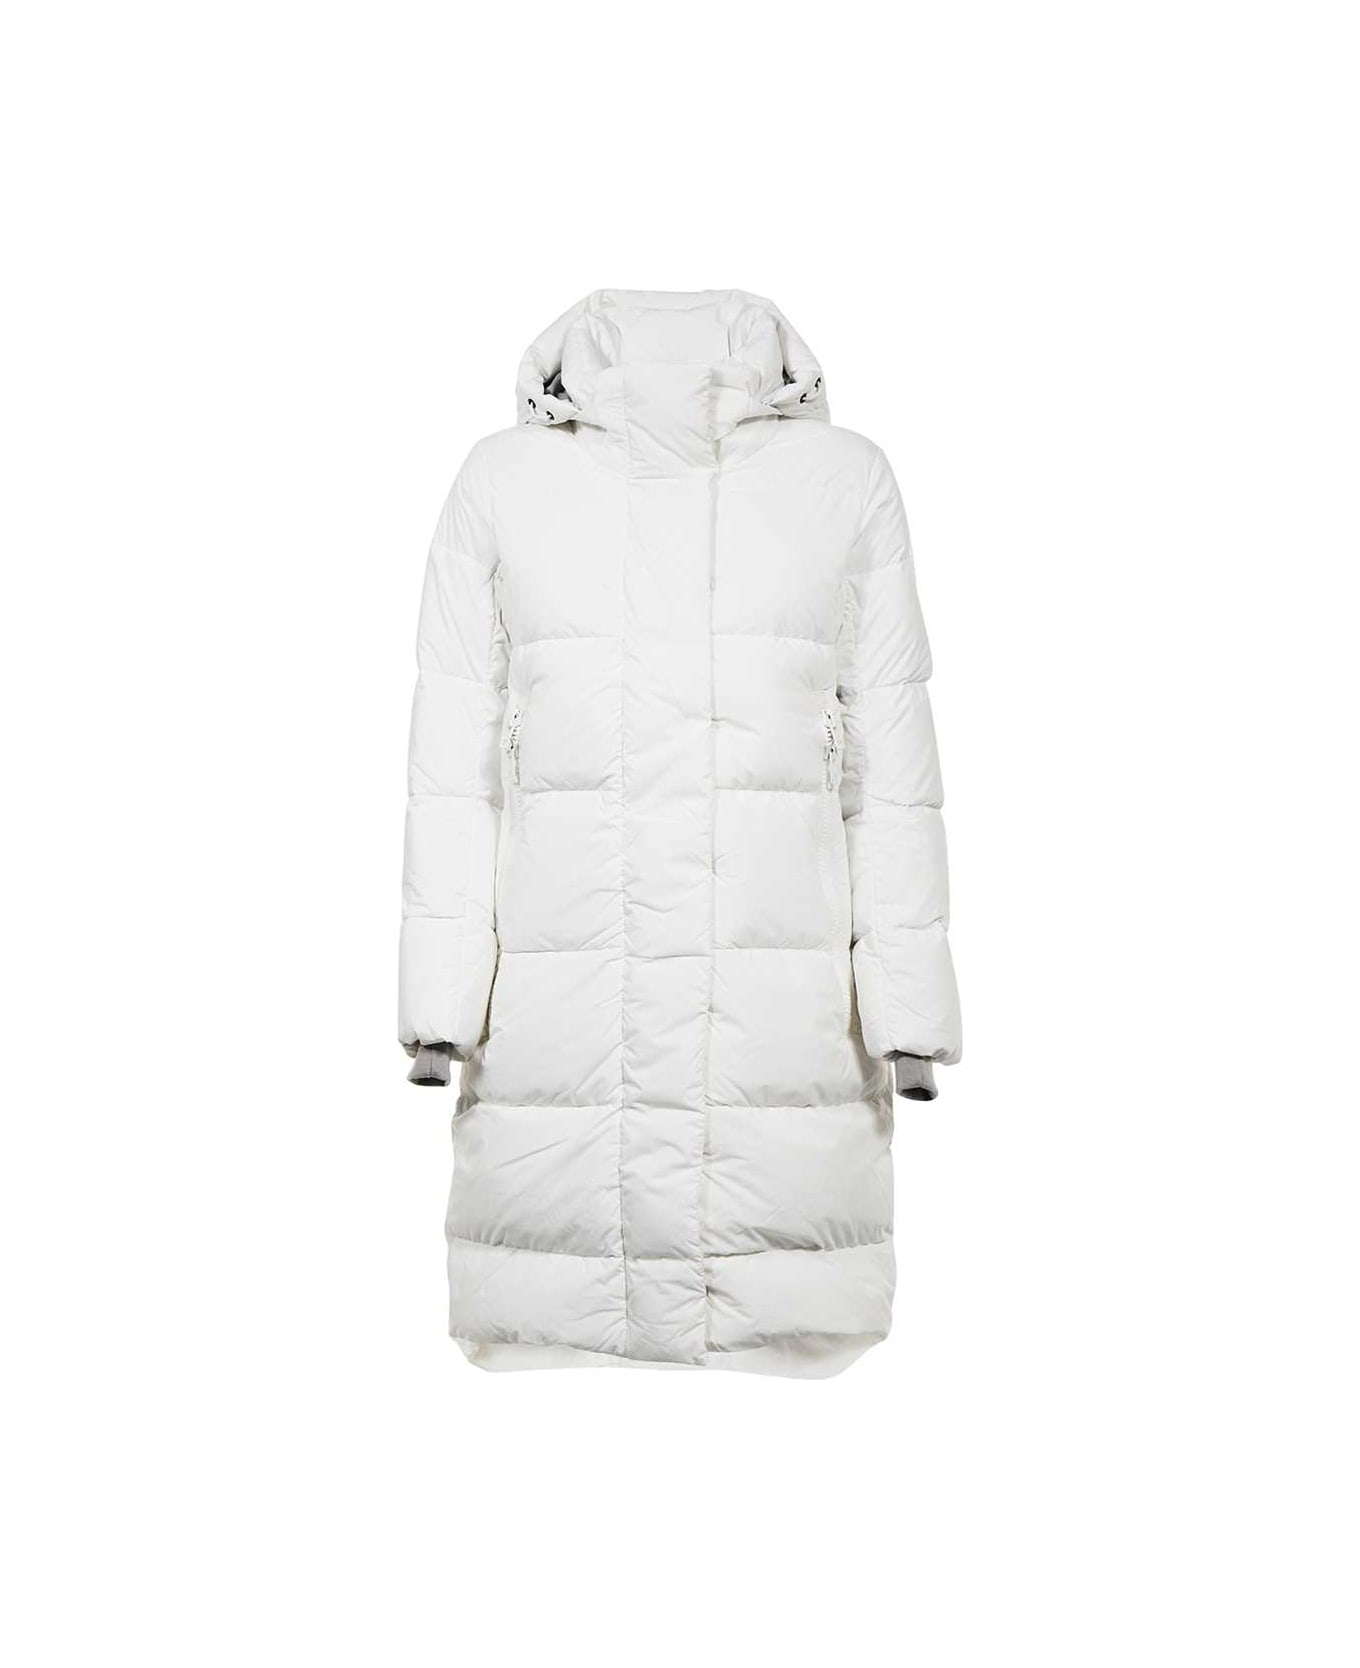 Canada Goose Long Hooded Down Jacket - White